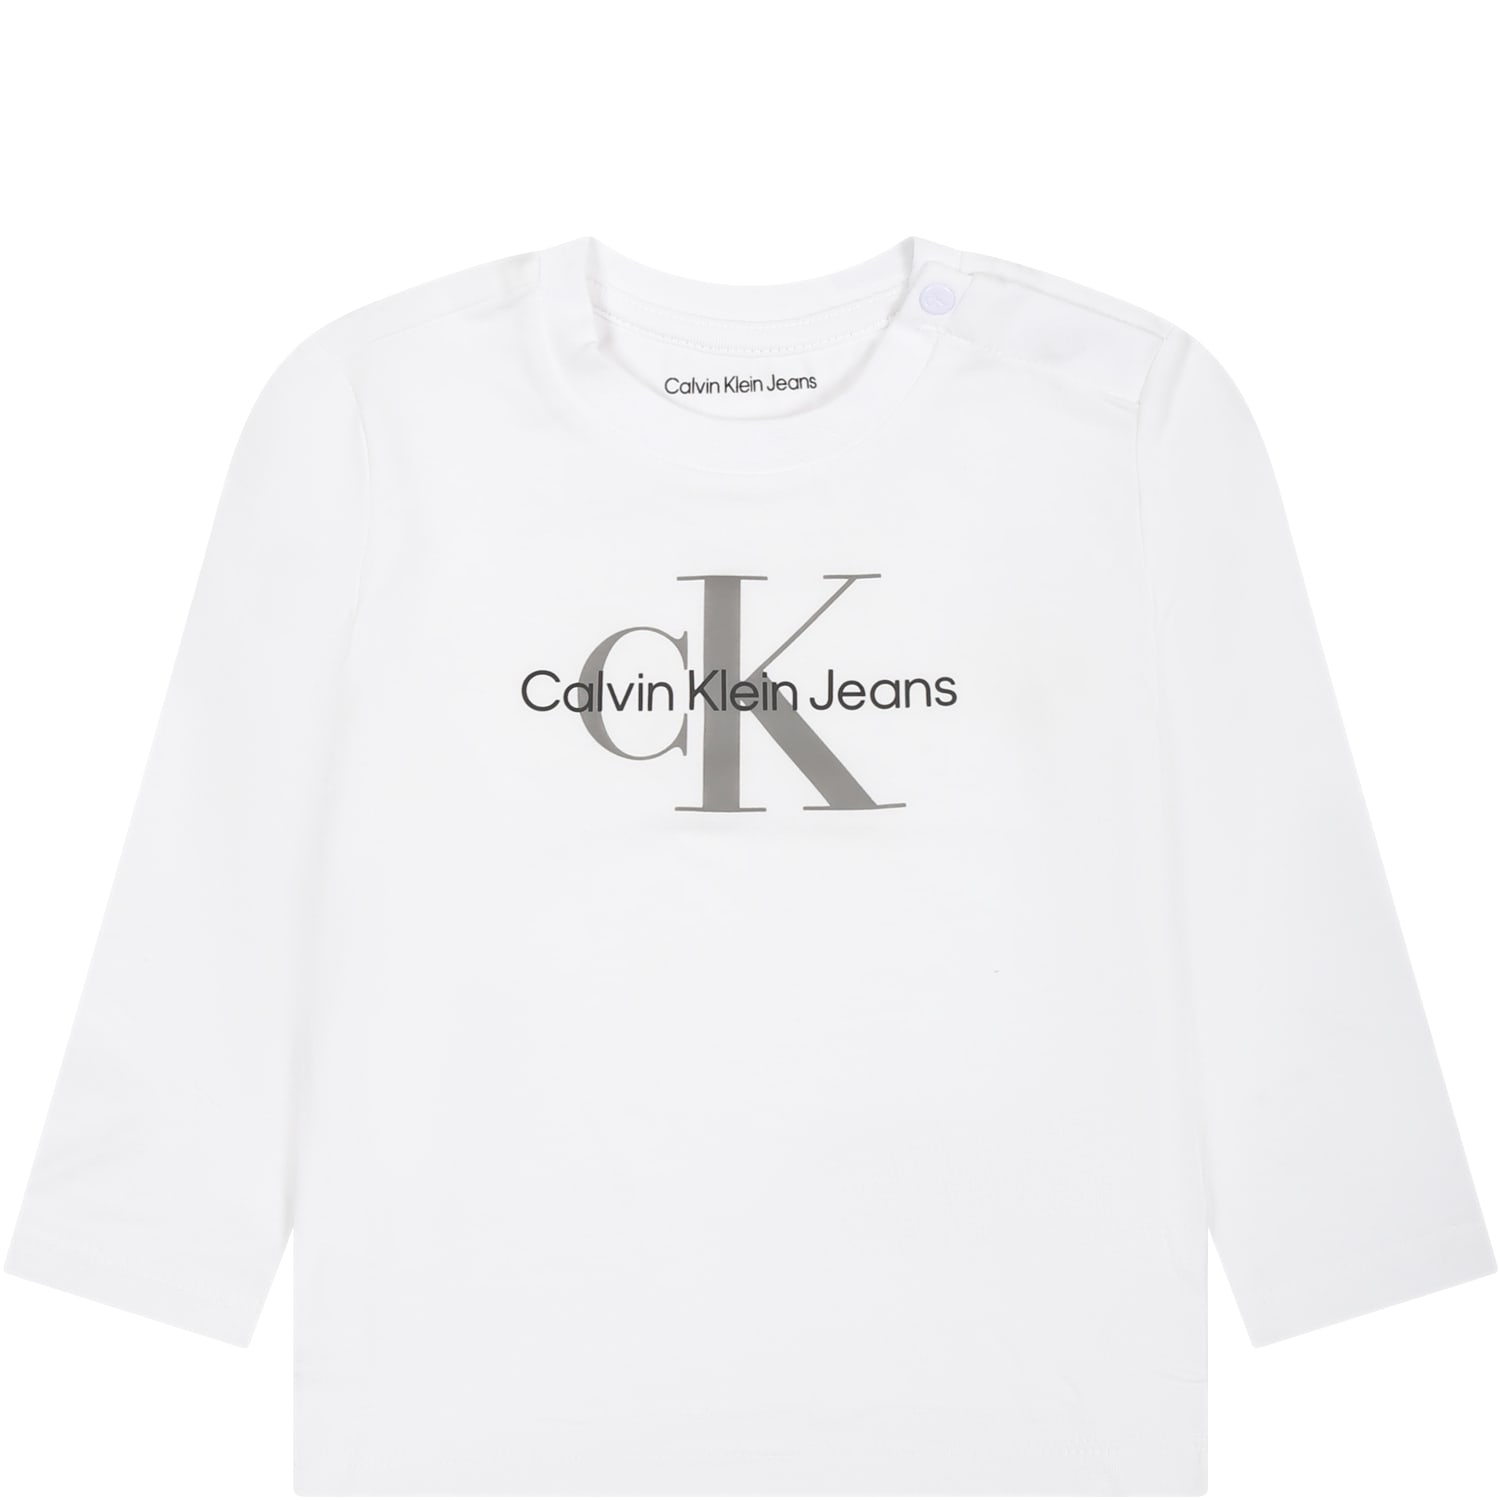 CALVIN KLEIN WHITE T-SHIRT FOR BABIES WITH LOGO